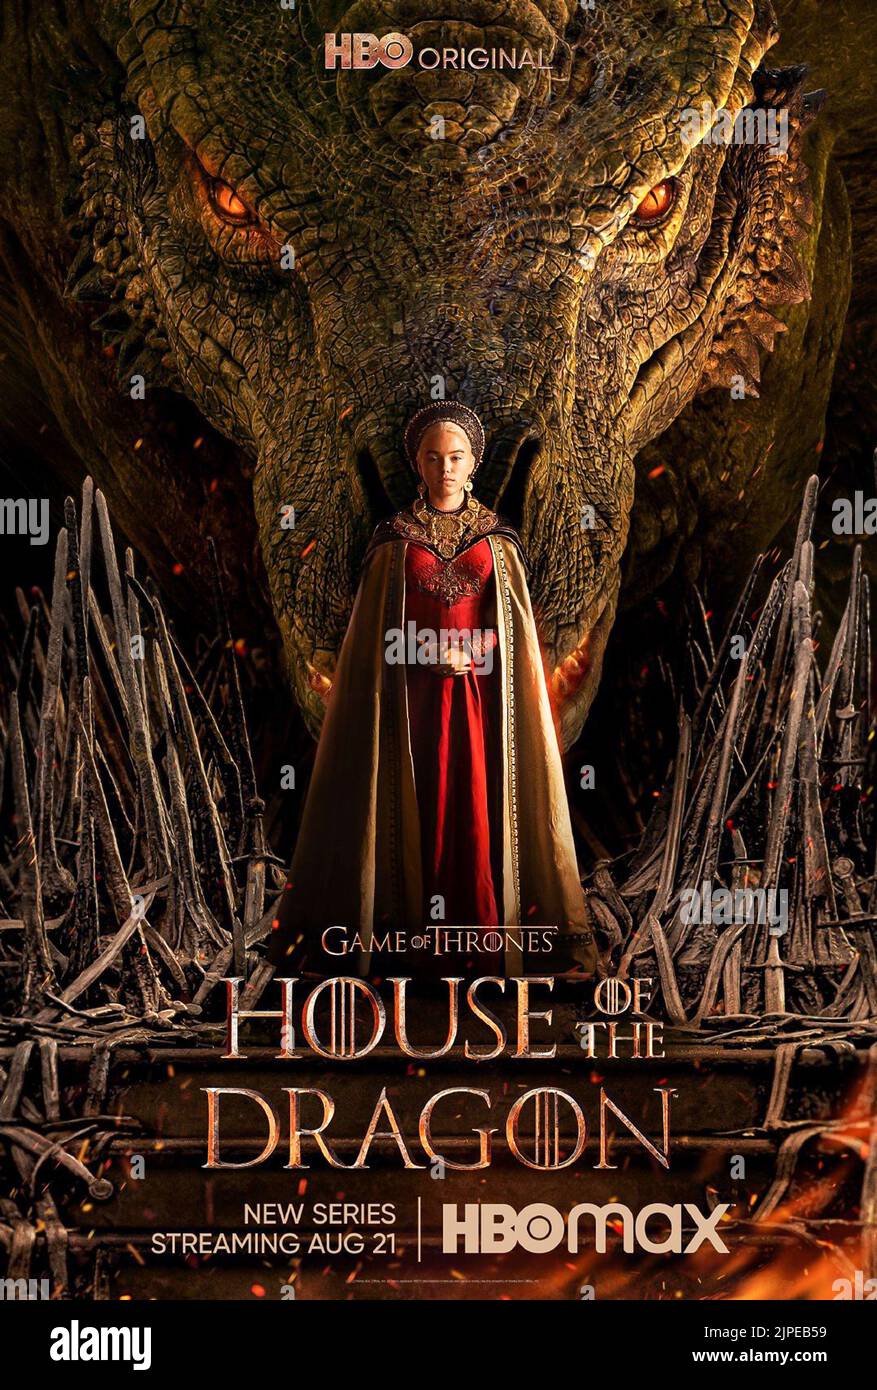 USA. Milly Alcock  in the (C)HBO new series: House of the Dragon (2022).  Plot: The story of the House Targaryen set 300 years before the events of Game of Thrones (2011).  Ref: LMK106-J8255-150822 Supplied by LMKMEDIA. Editorial Only. Landmark Media is not the copyright owner of these Film or TV stills but provides a service only for recognised Media outlets. pictures@lmkmedia.com Stock Photo